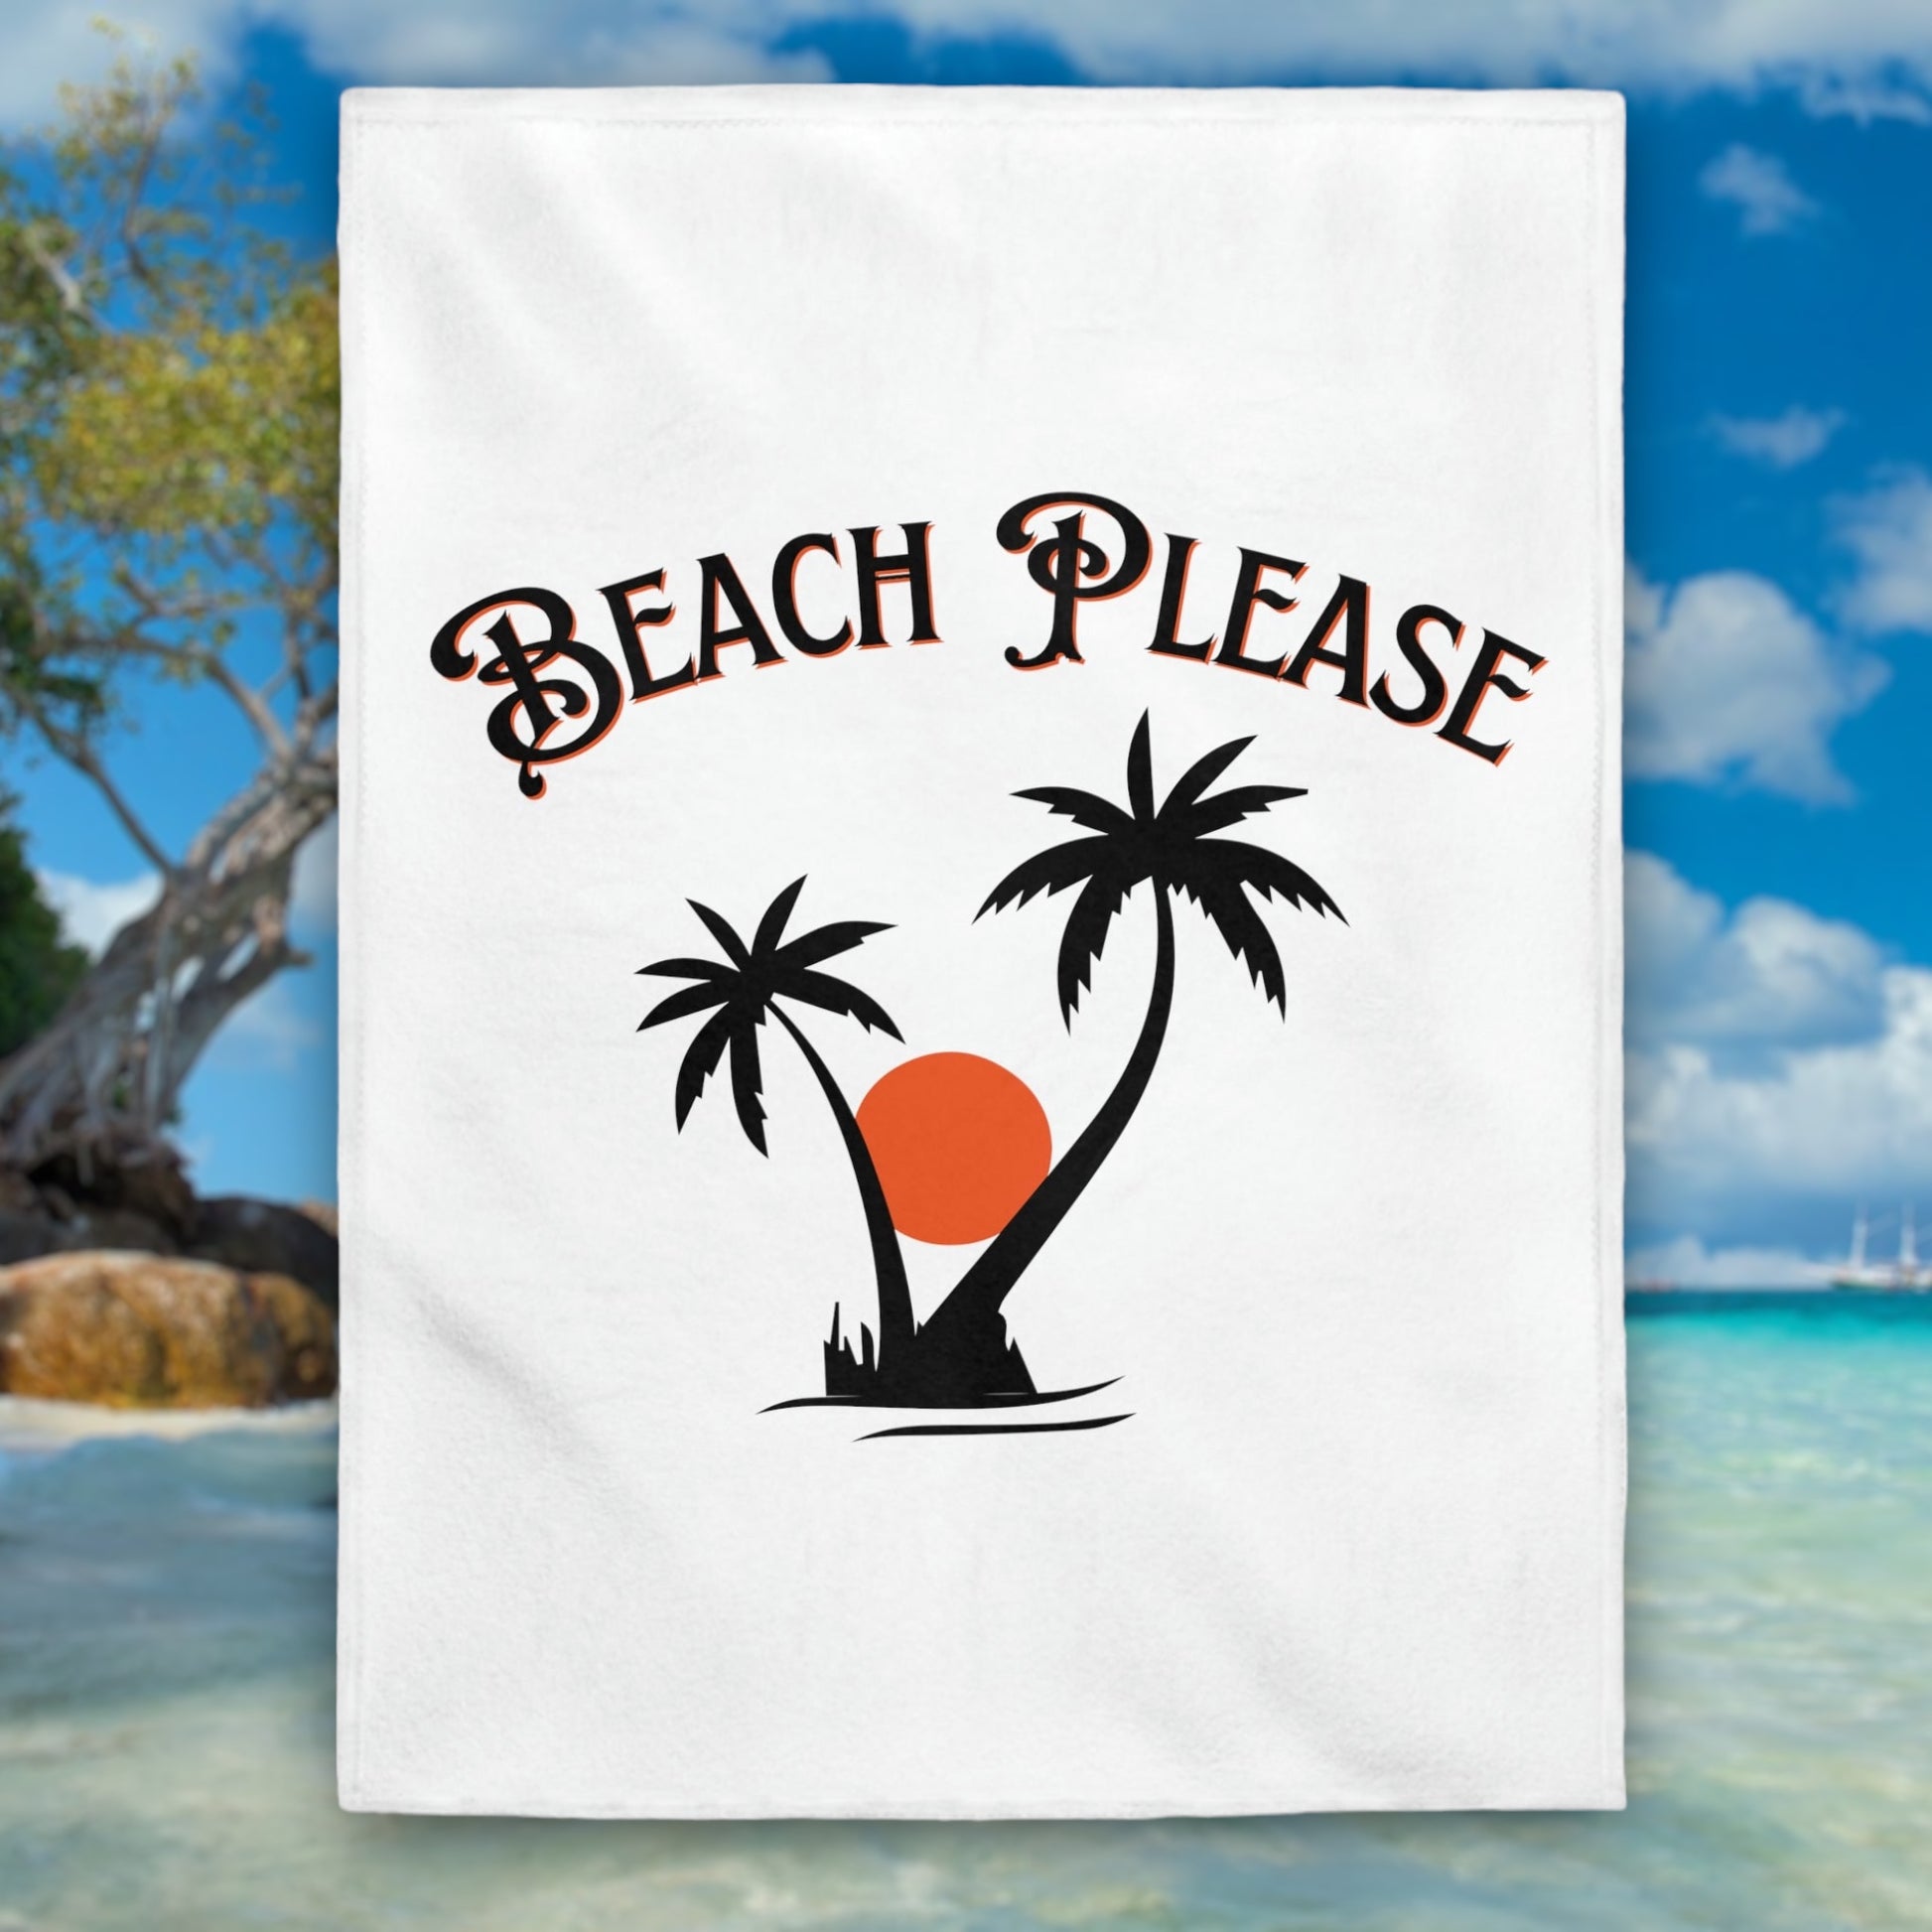 "Beach Please" Blanket - Weave Got Gifts - Unique Gifts You Won’t Find Anywhere Else!